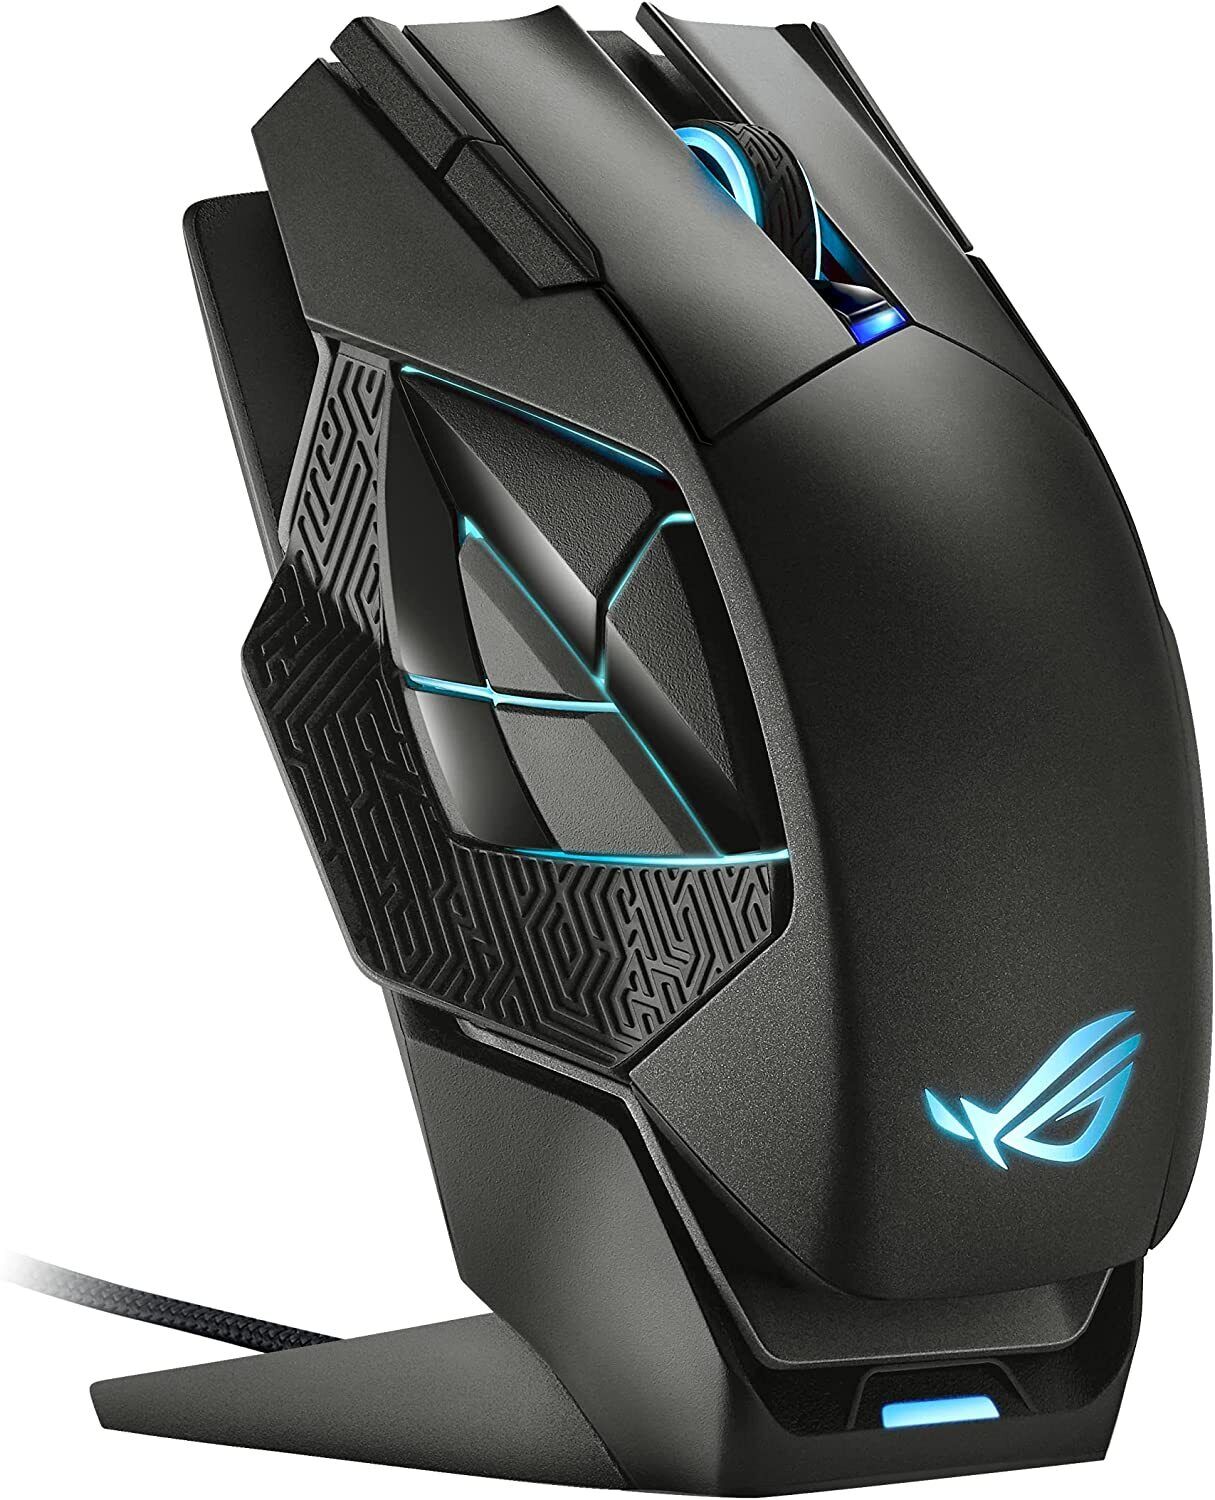 ASUS P707 ROG Spatha X Wireless Gaming Mouse